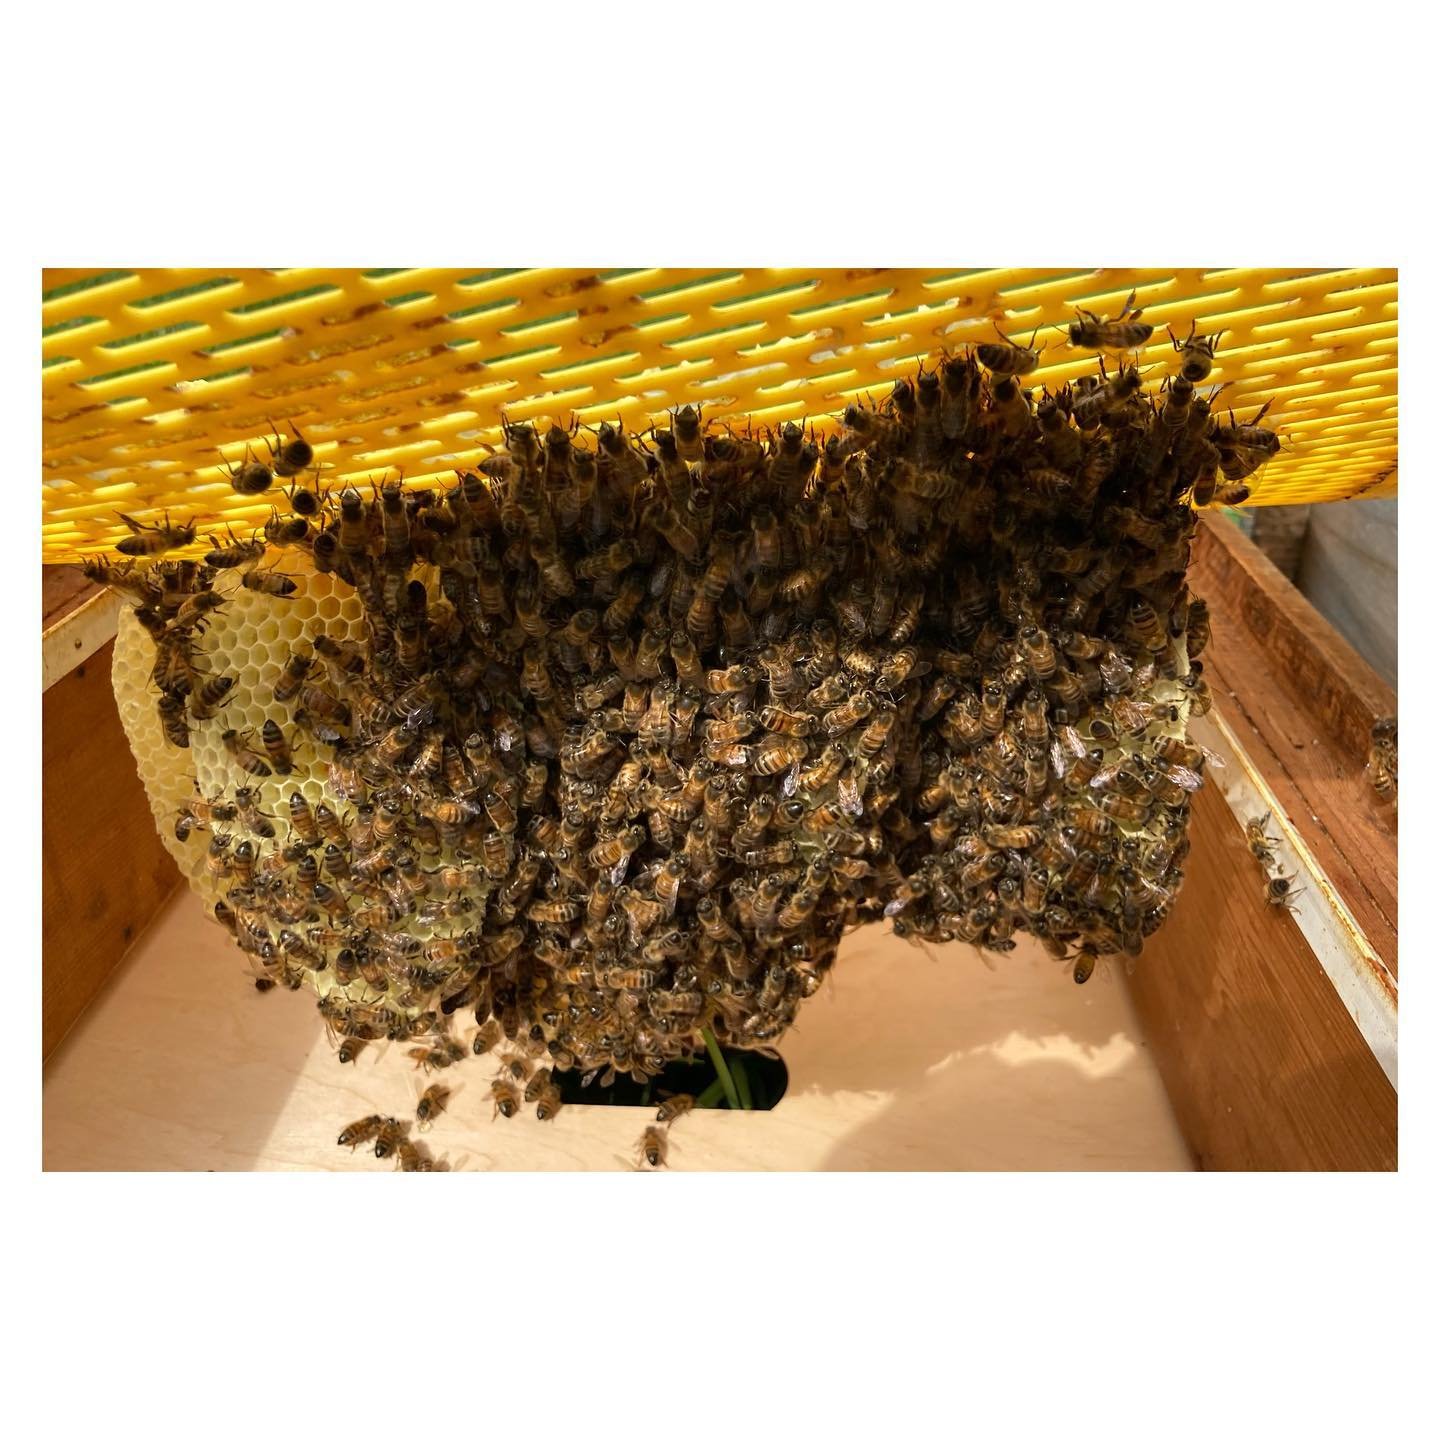 I&rsquo;m always amazed at how quickly these ladies can build comb!

I left out a couple of frames from a super the other day and by the time I went to replace the frames today, the bees had already built some beautiful wild comb.

It looks like all 